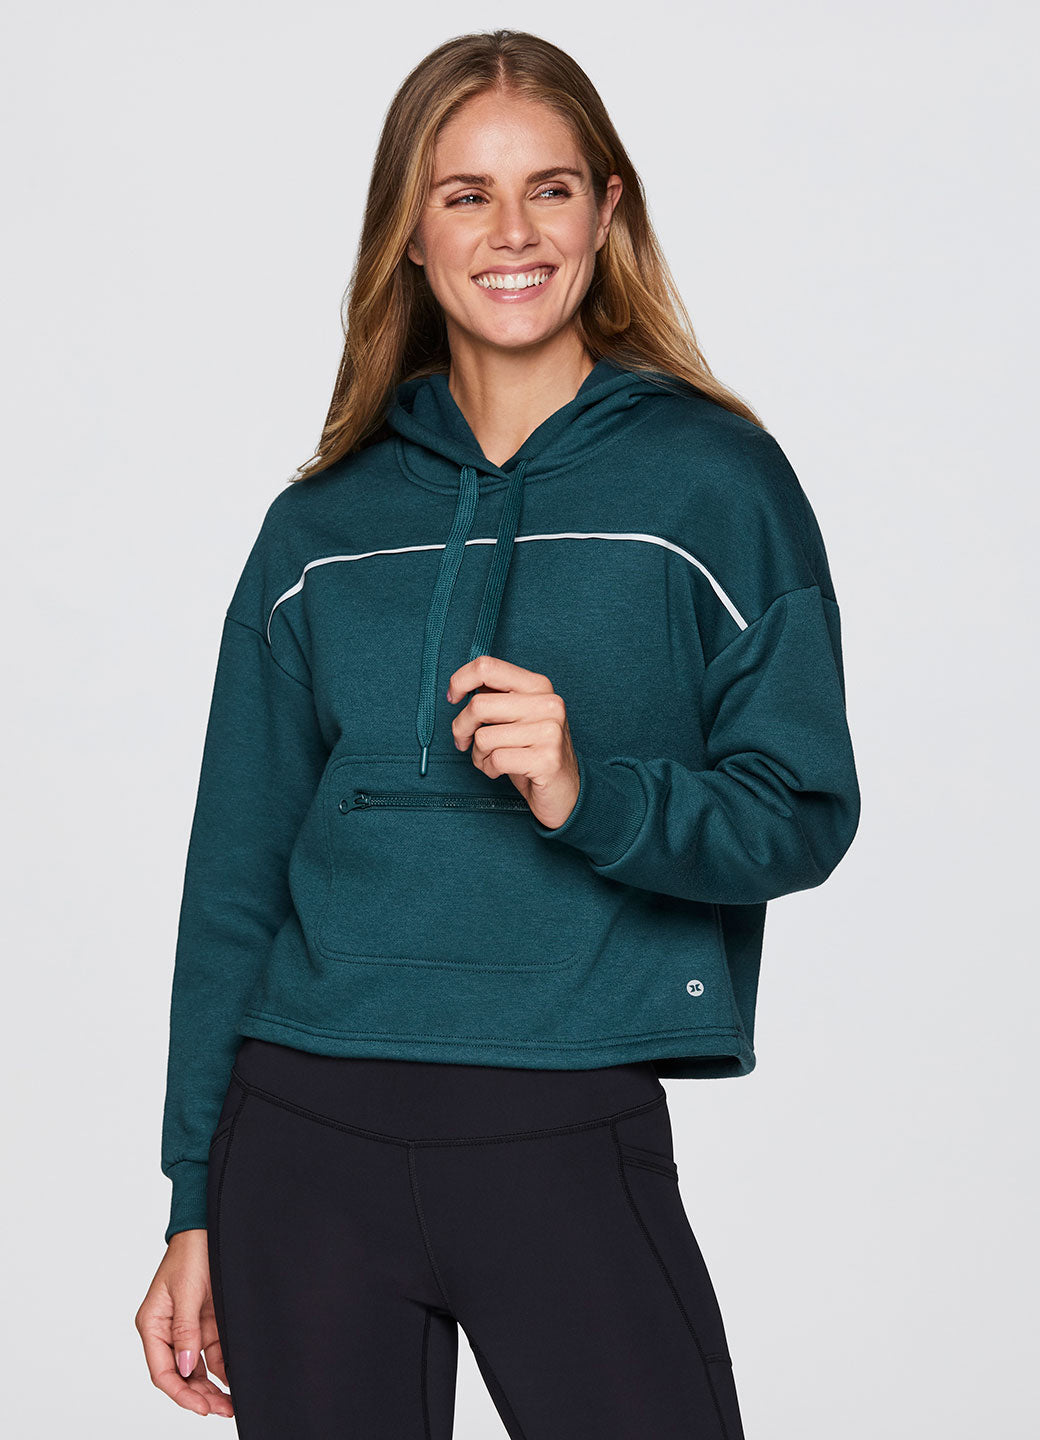 Prime Ready To Roll Fleece Zip Mock Neck Pullover - RBX Active